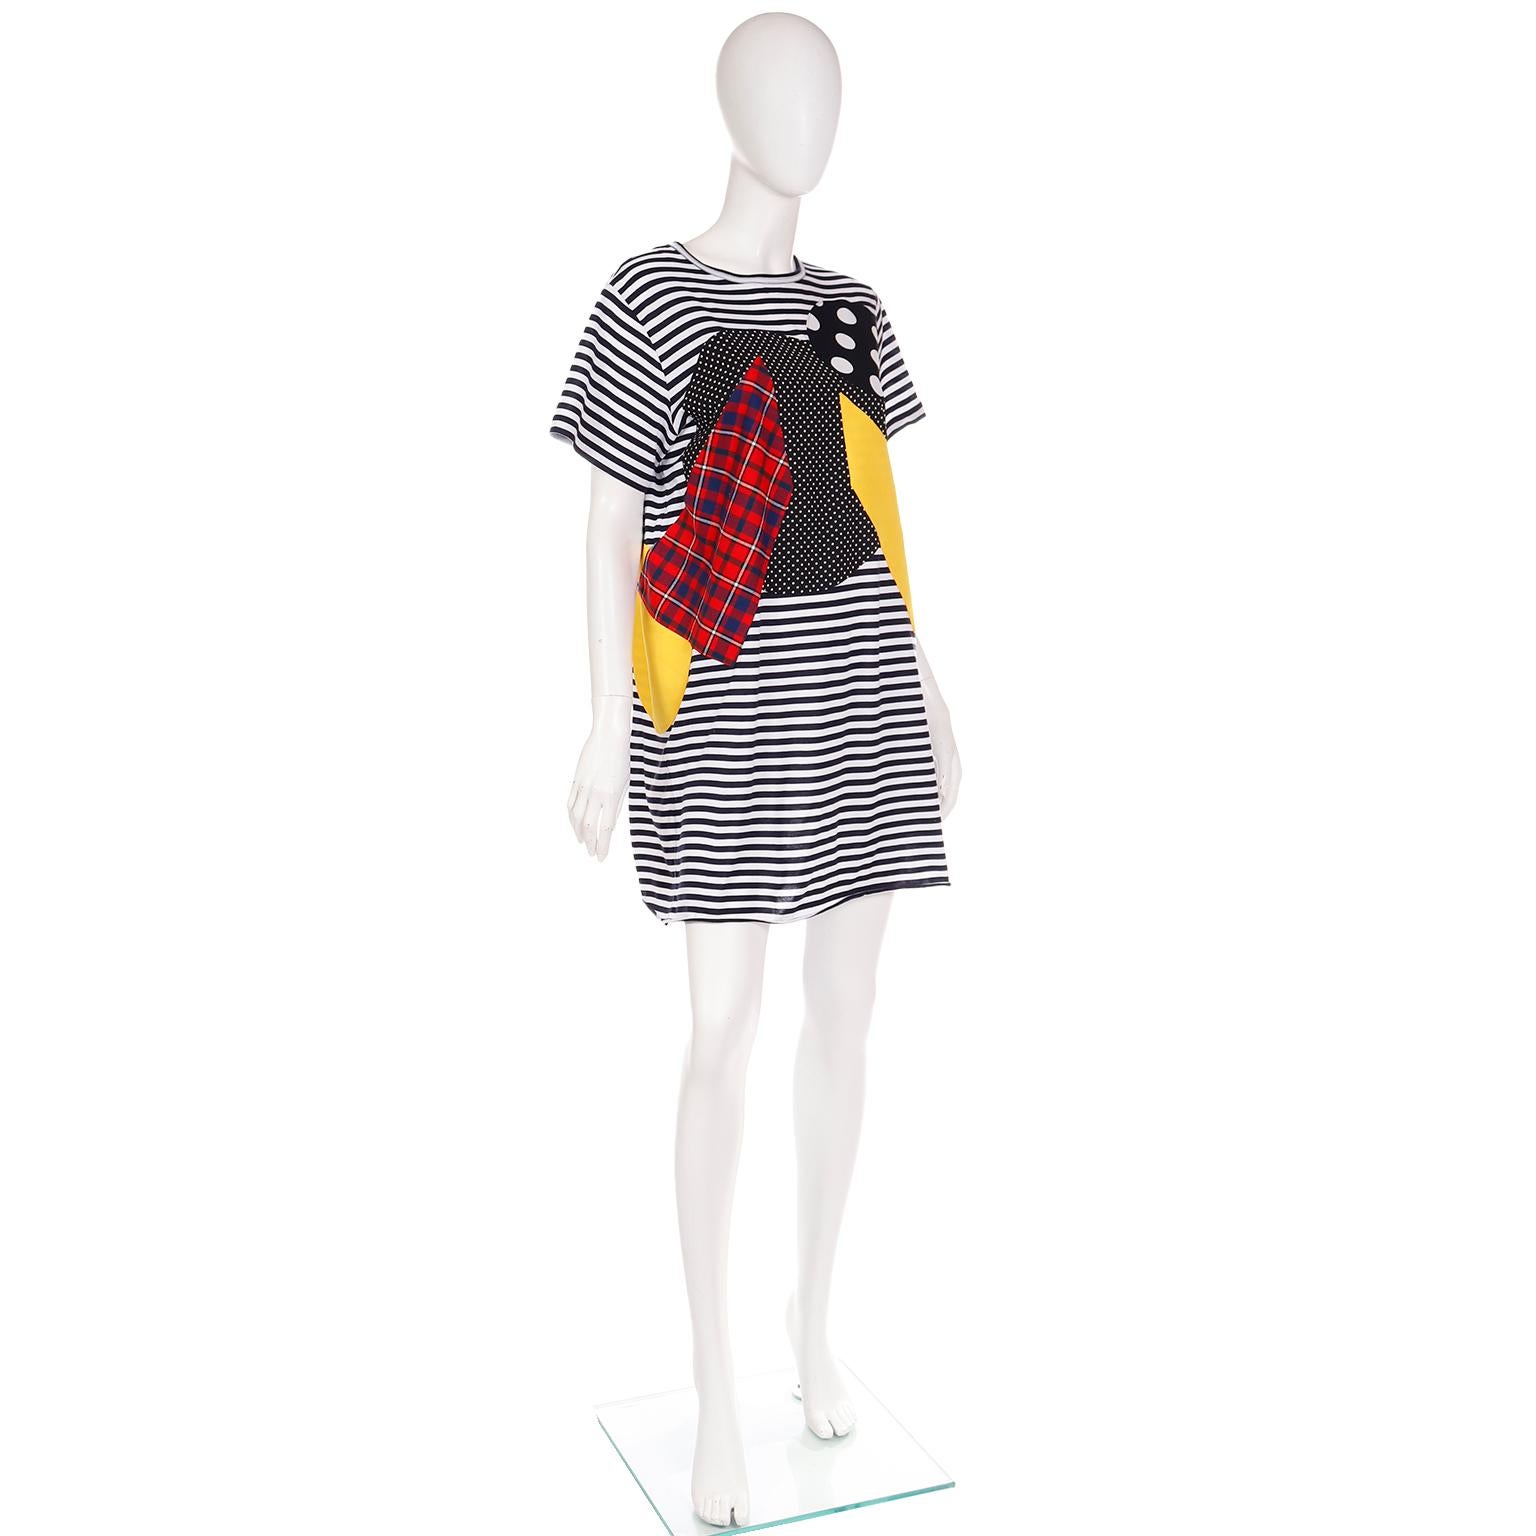 Junya Watanabe Comme des Garcons Striped Patchwork Print Cotton T Shirt Dress In Excellent Condition For Sale In Portland, OR